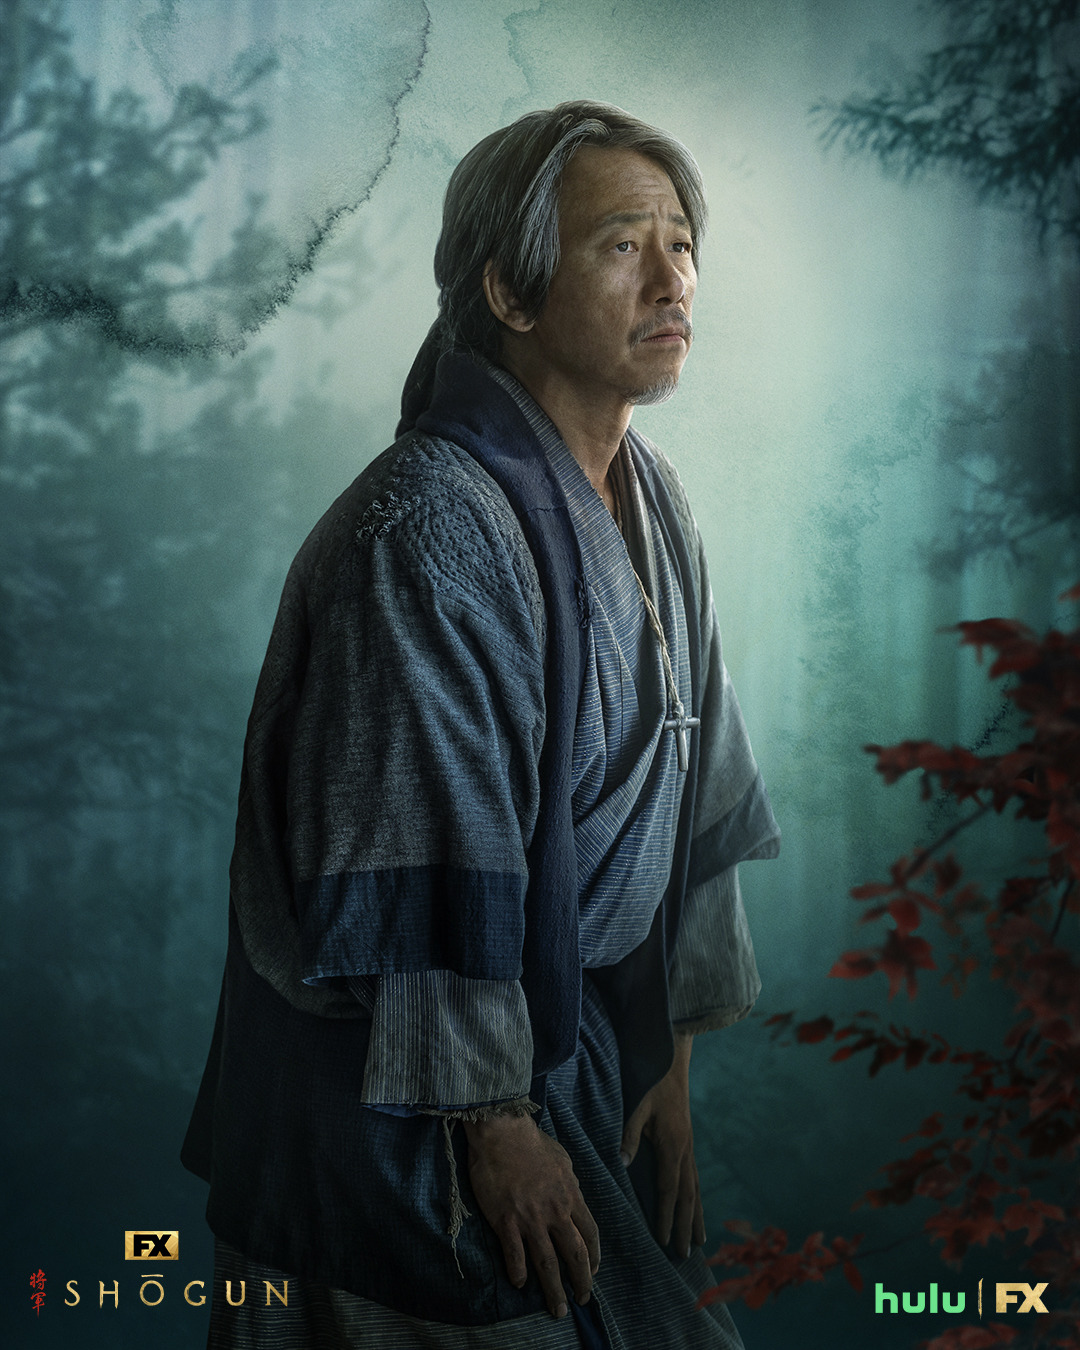 Extra Large TV Poster Image for Shogun (#10 of 24)